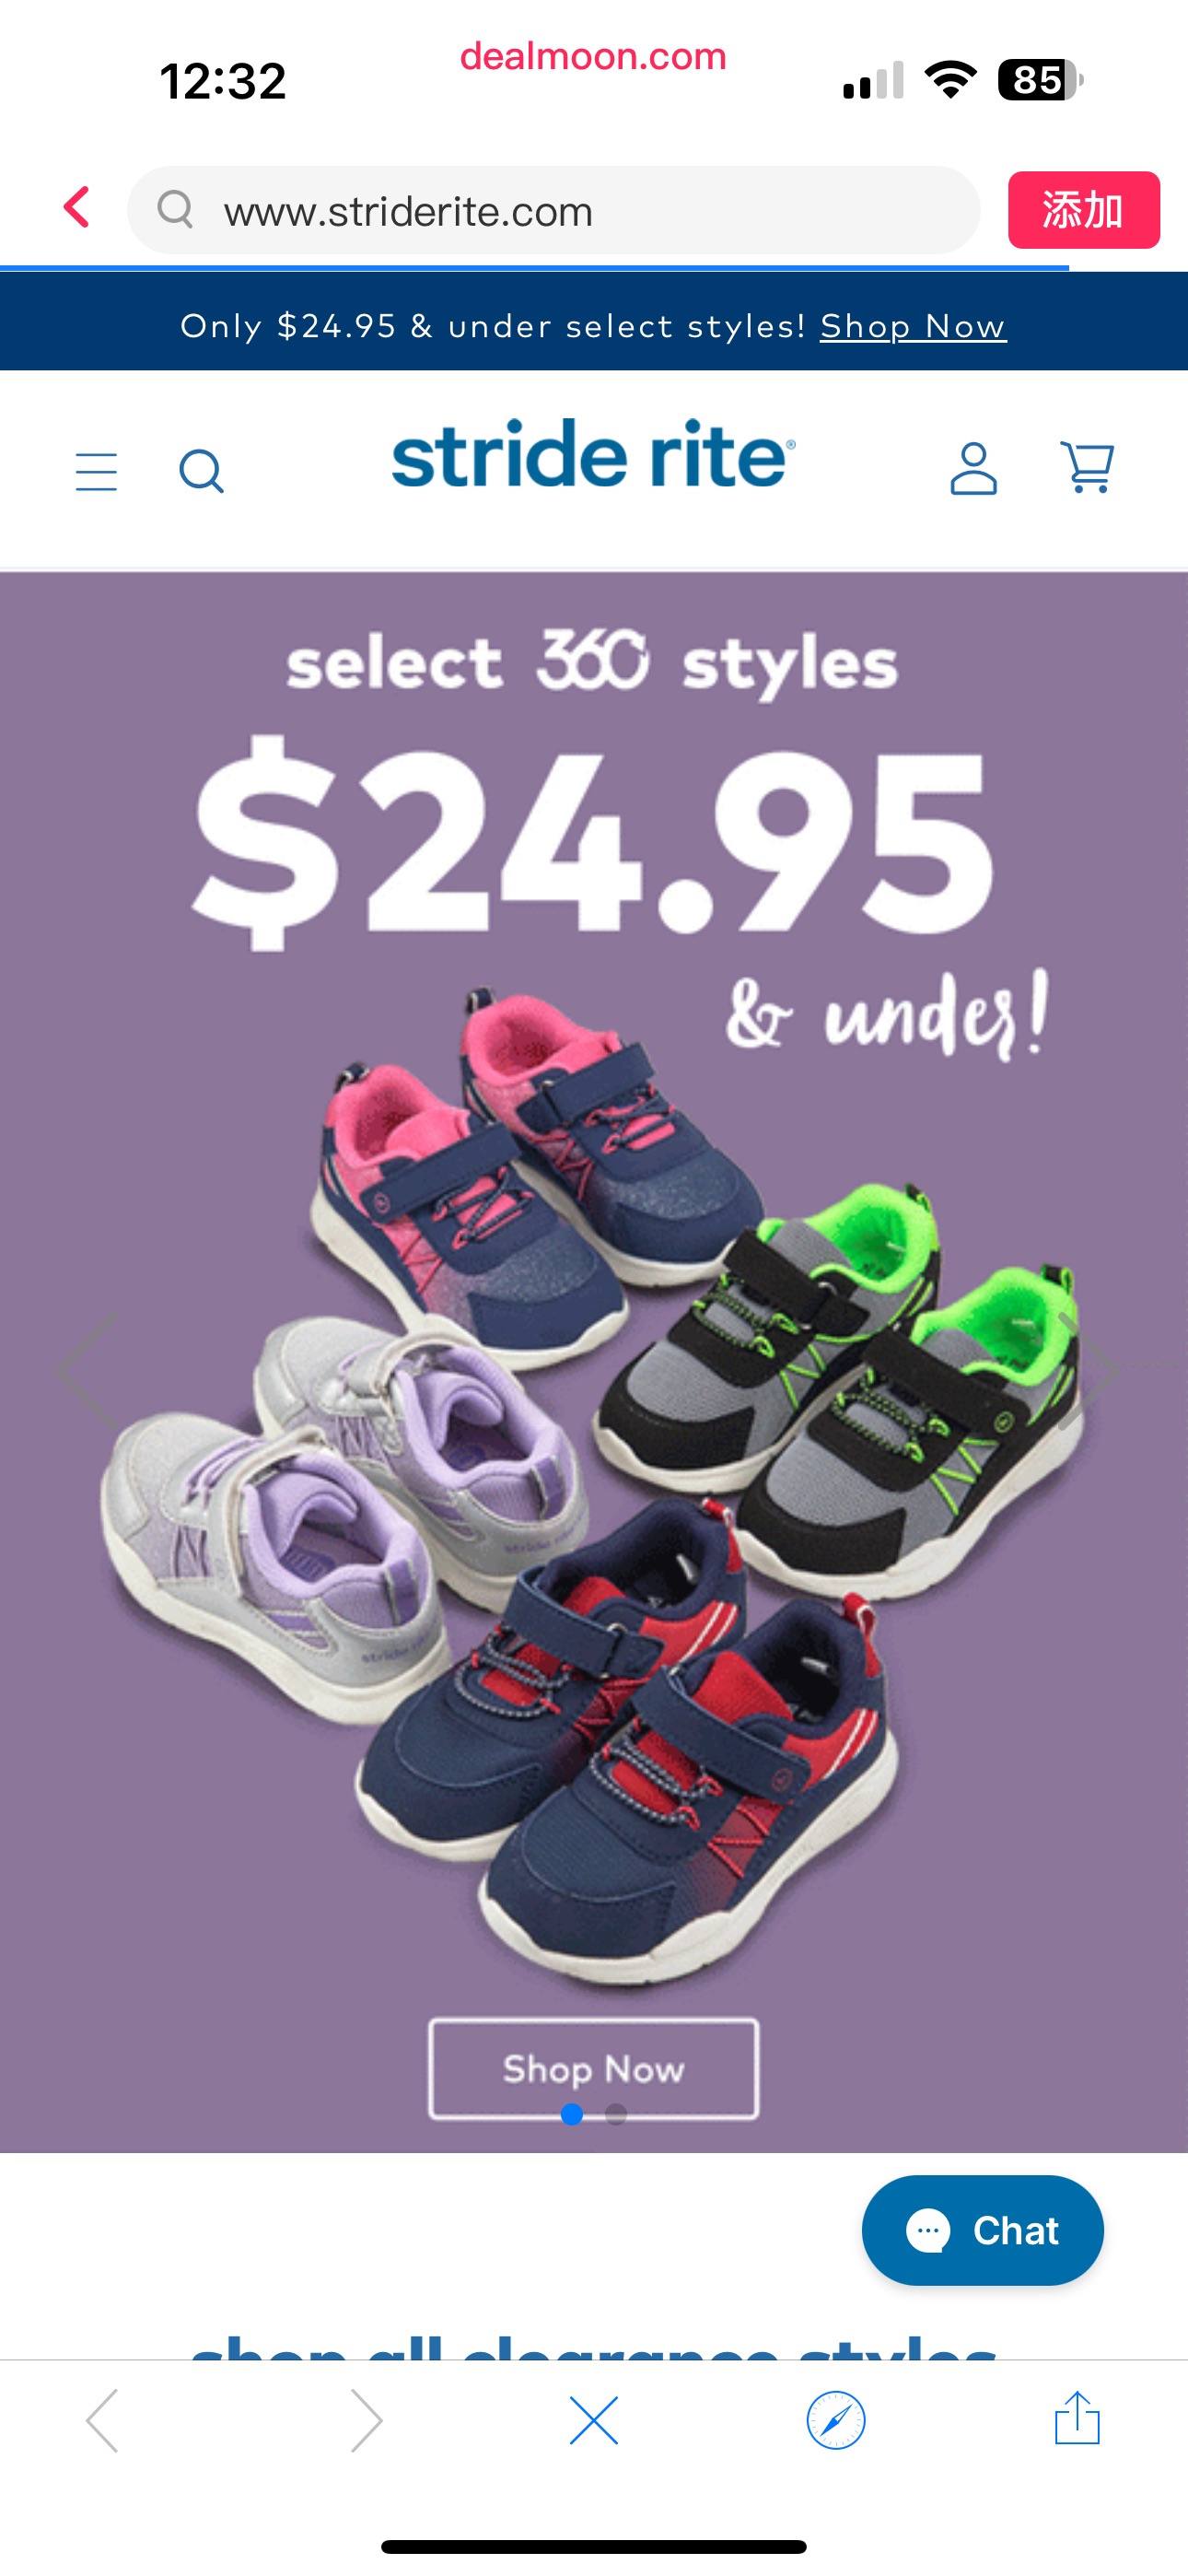 Kids Shoes from Stride Rite | Stride Rite
24.9童鞋封顶